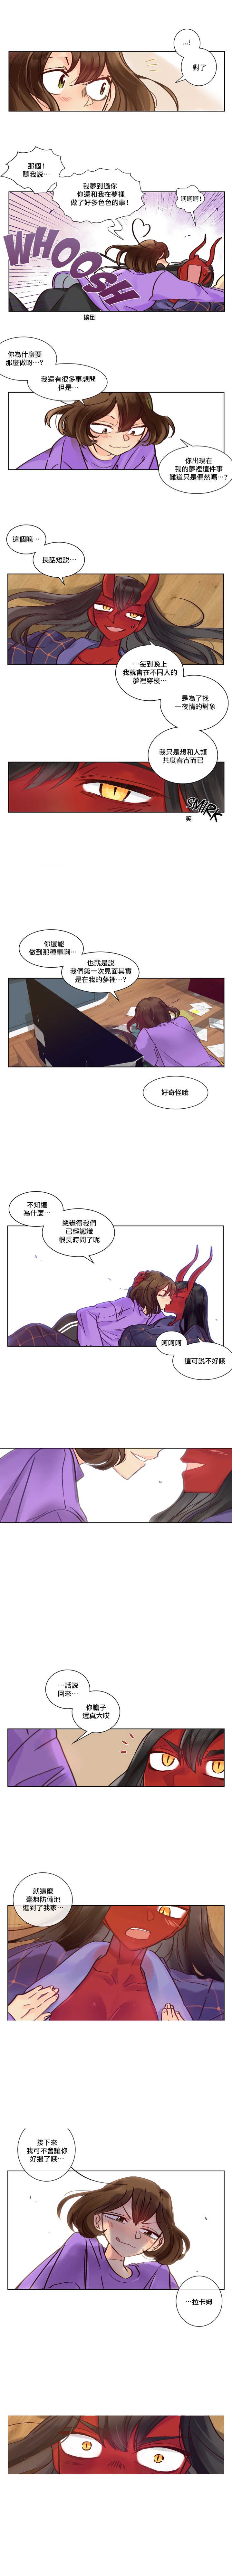 [Nanao Grey] Devil Drop | 天降惡魔 [Chinese] [沒有漢化] [Ongoing] - Page 34